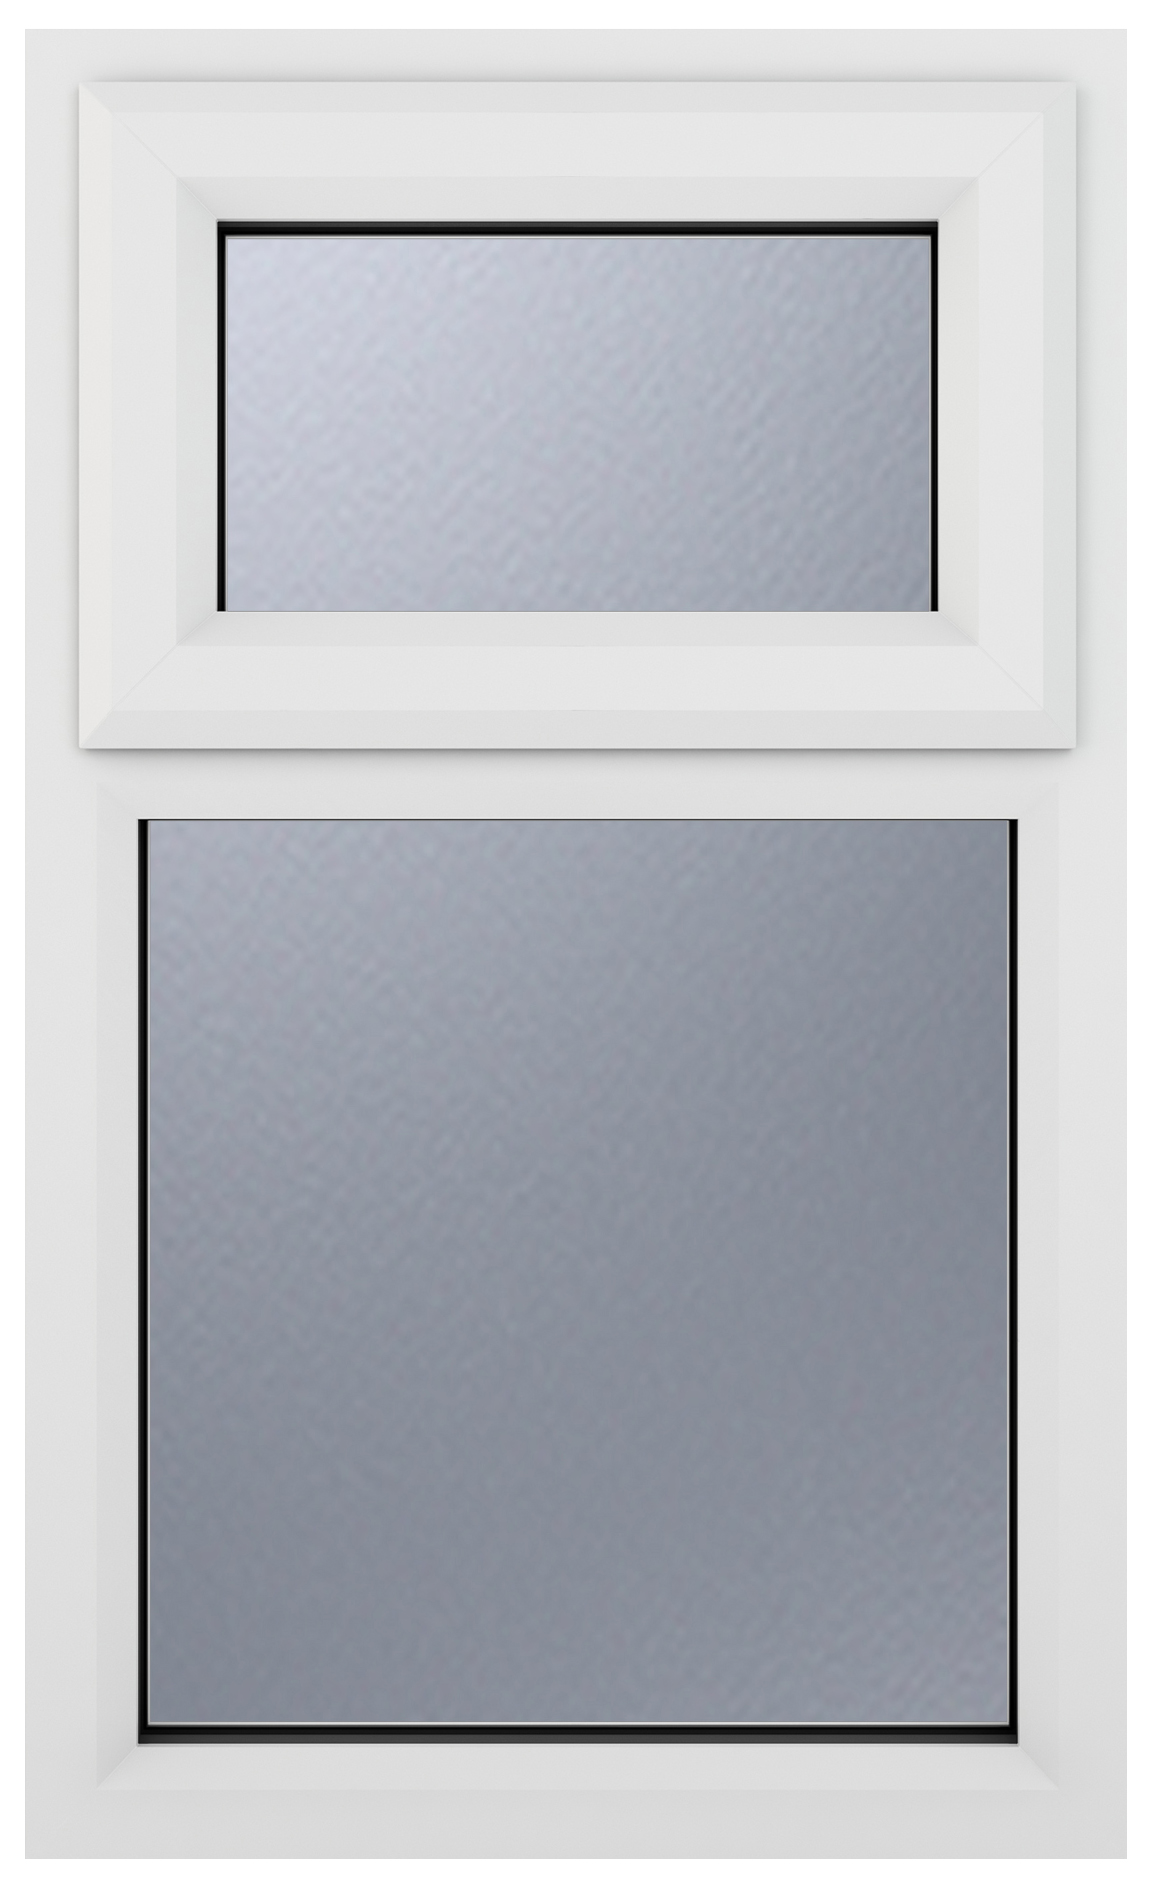 Crystal uPVC White Top Hung Opener Obscure Double Glazed Fixed Light Window - 610 x 1115mm